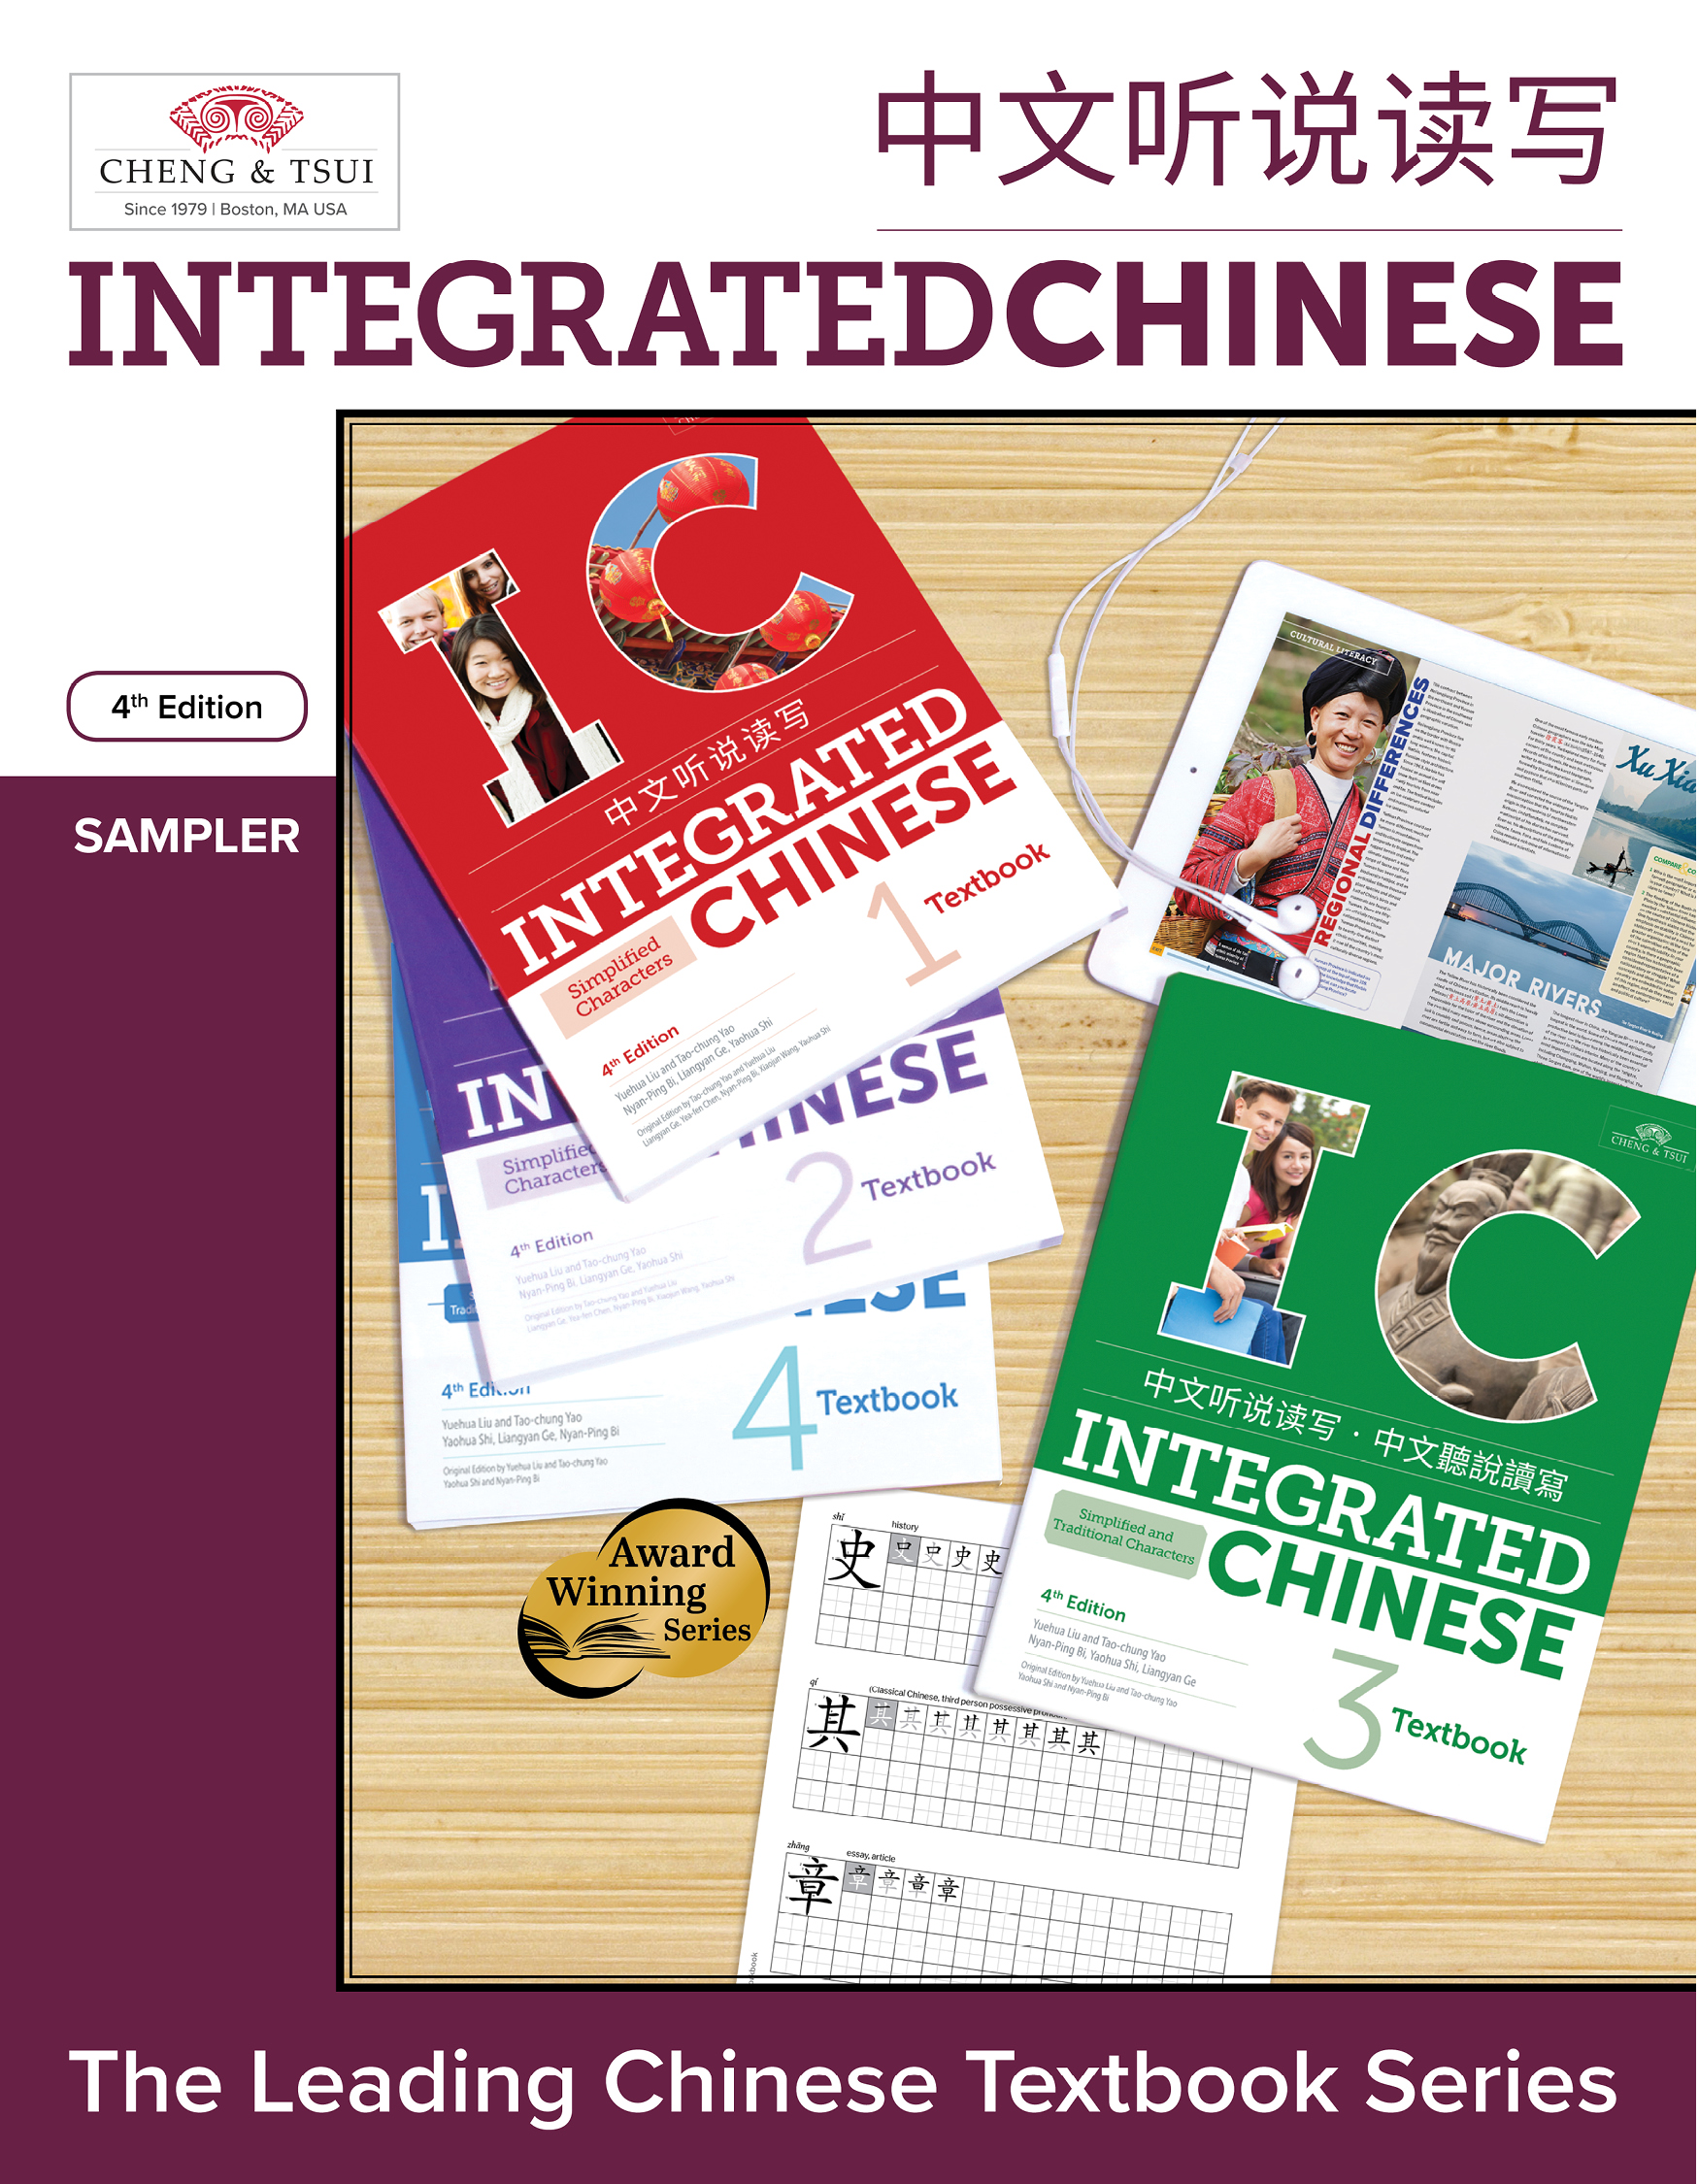 Integrated Chinese 4th Edition Sampler